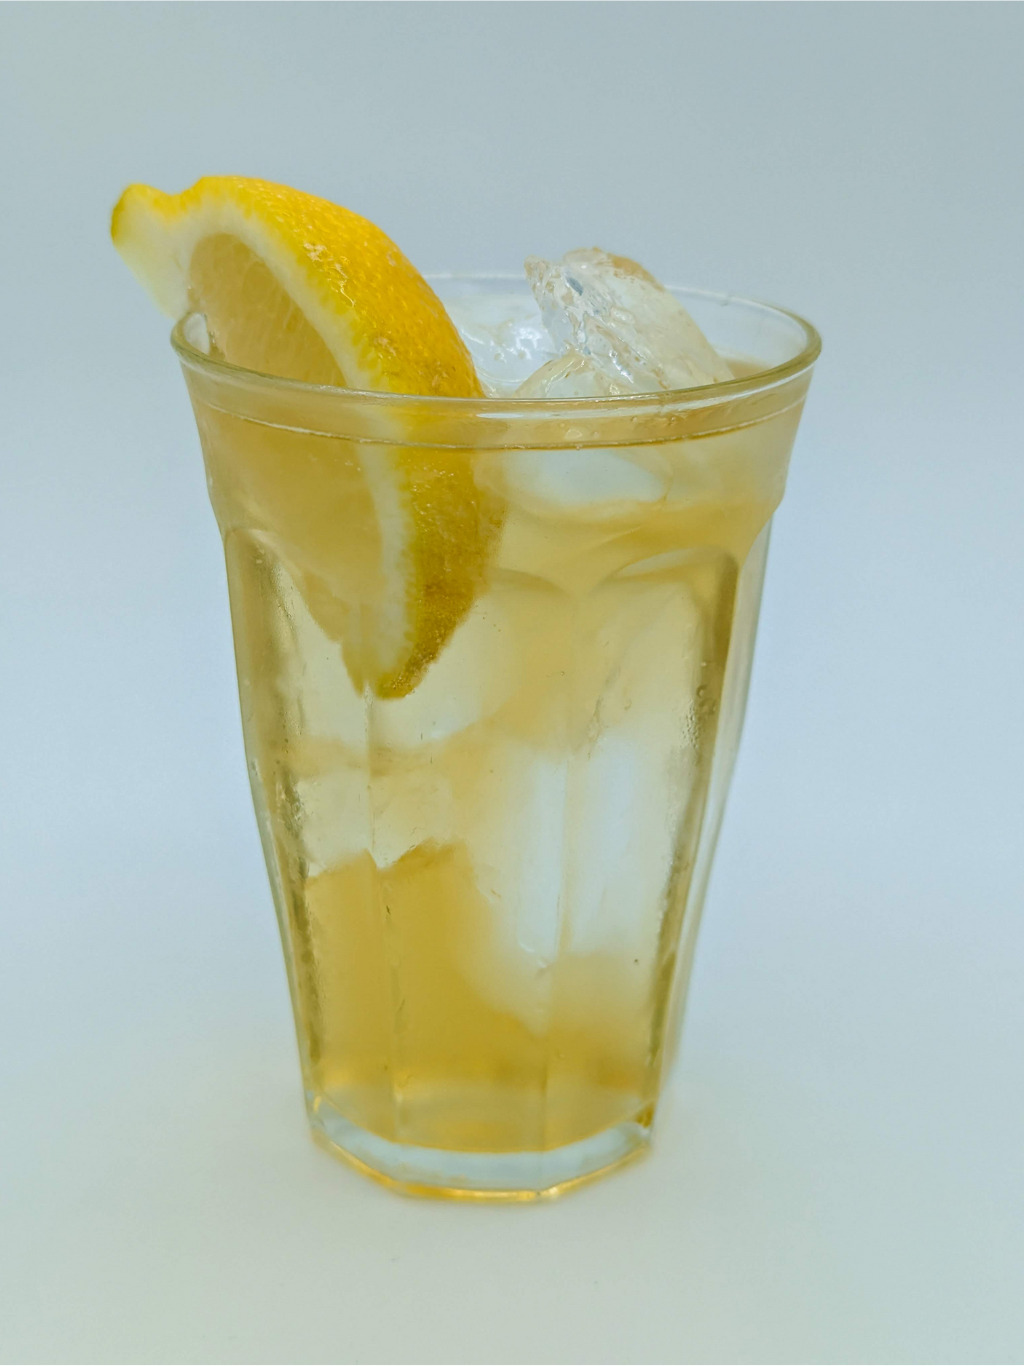 yellow liquid in a clear glass filled with ice and garnished with a lemon wedge